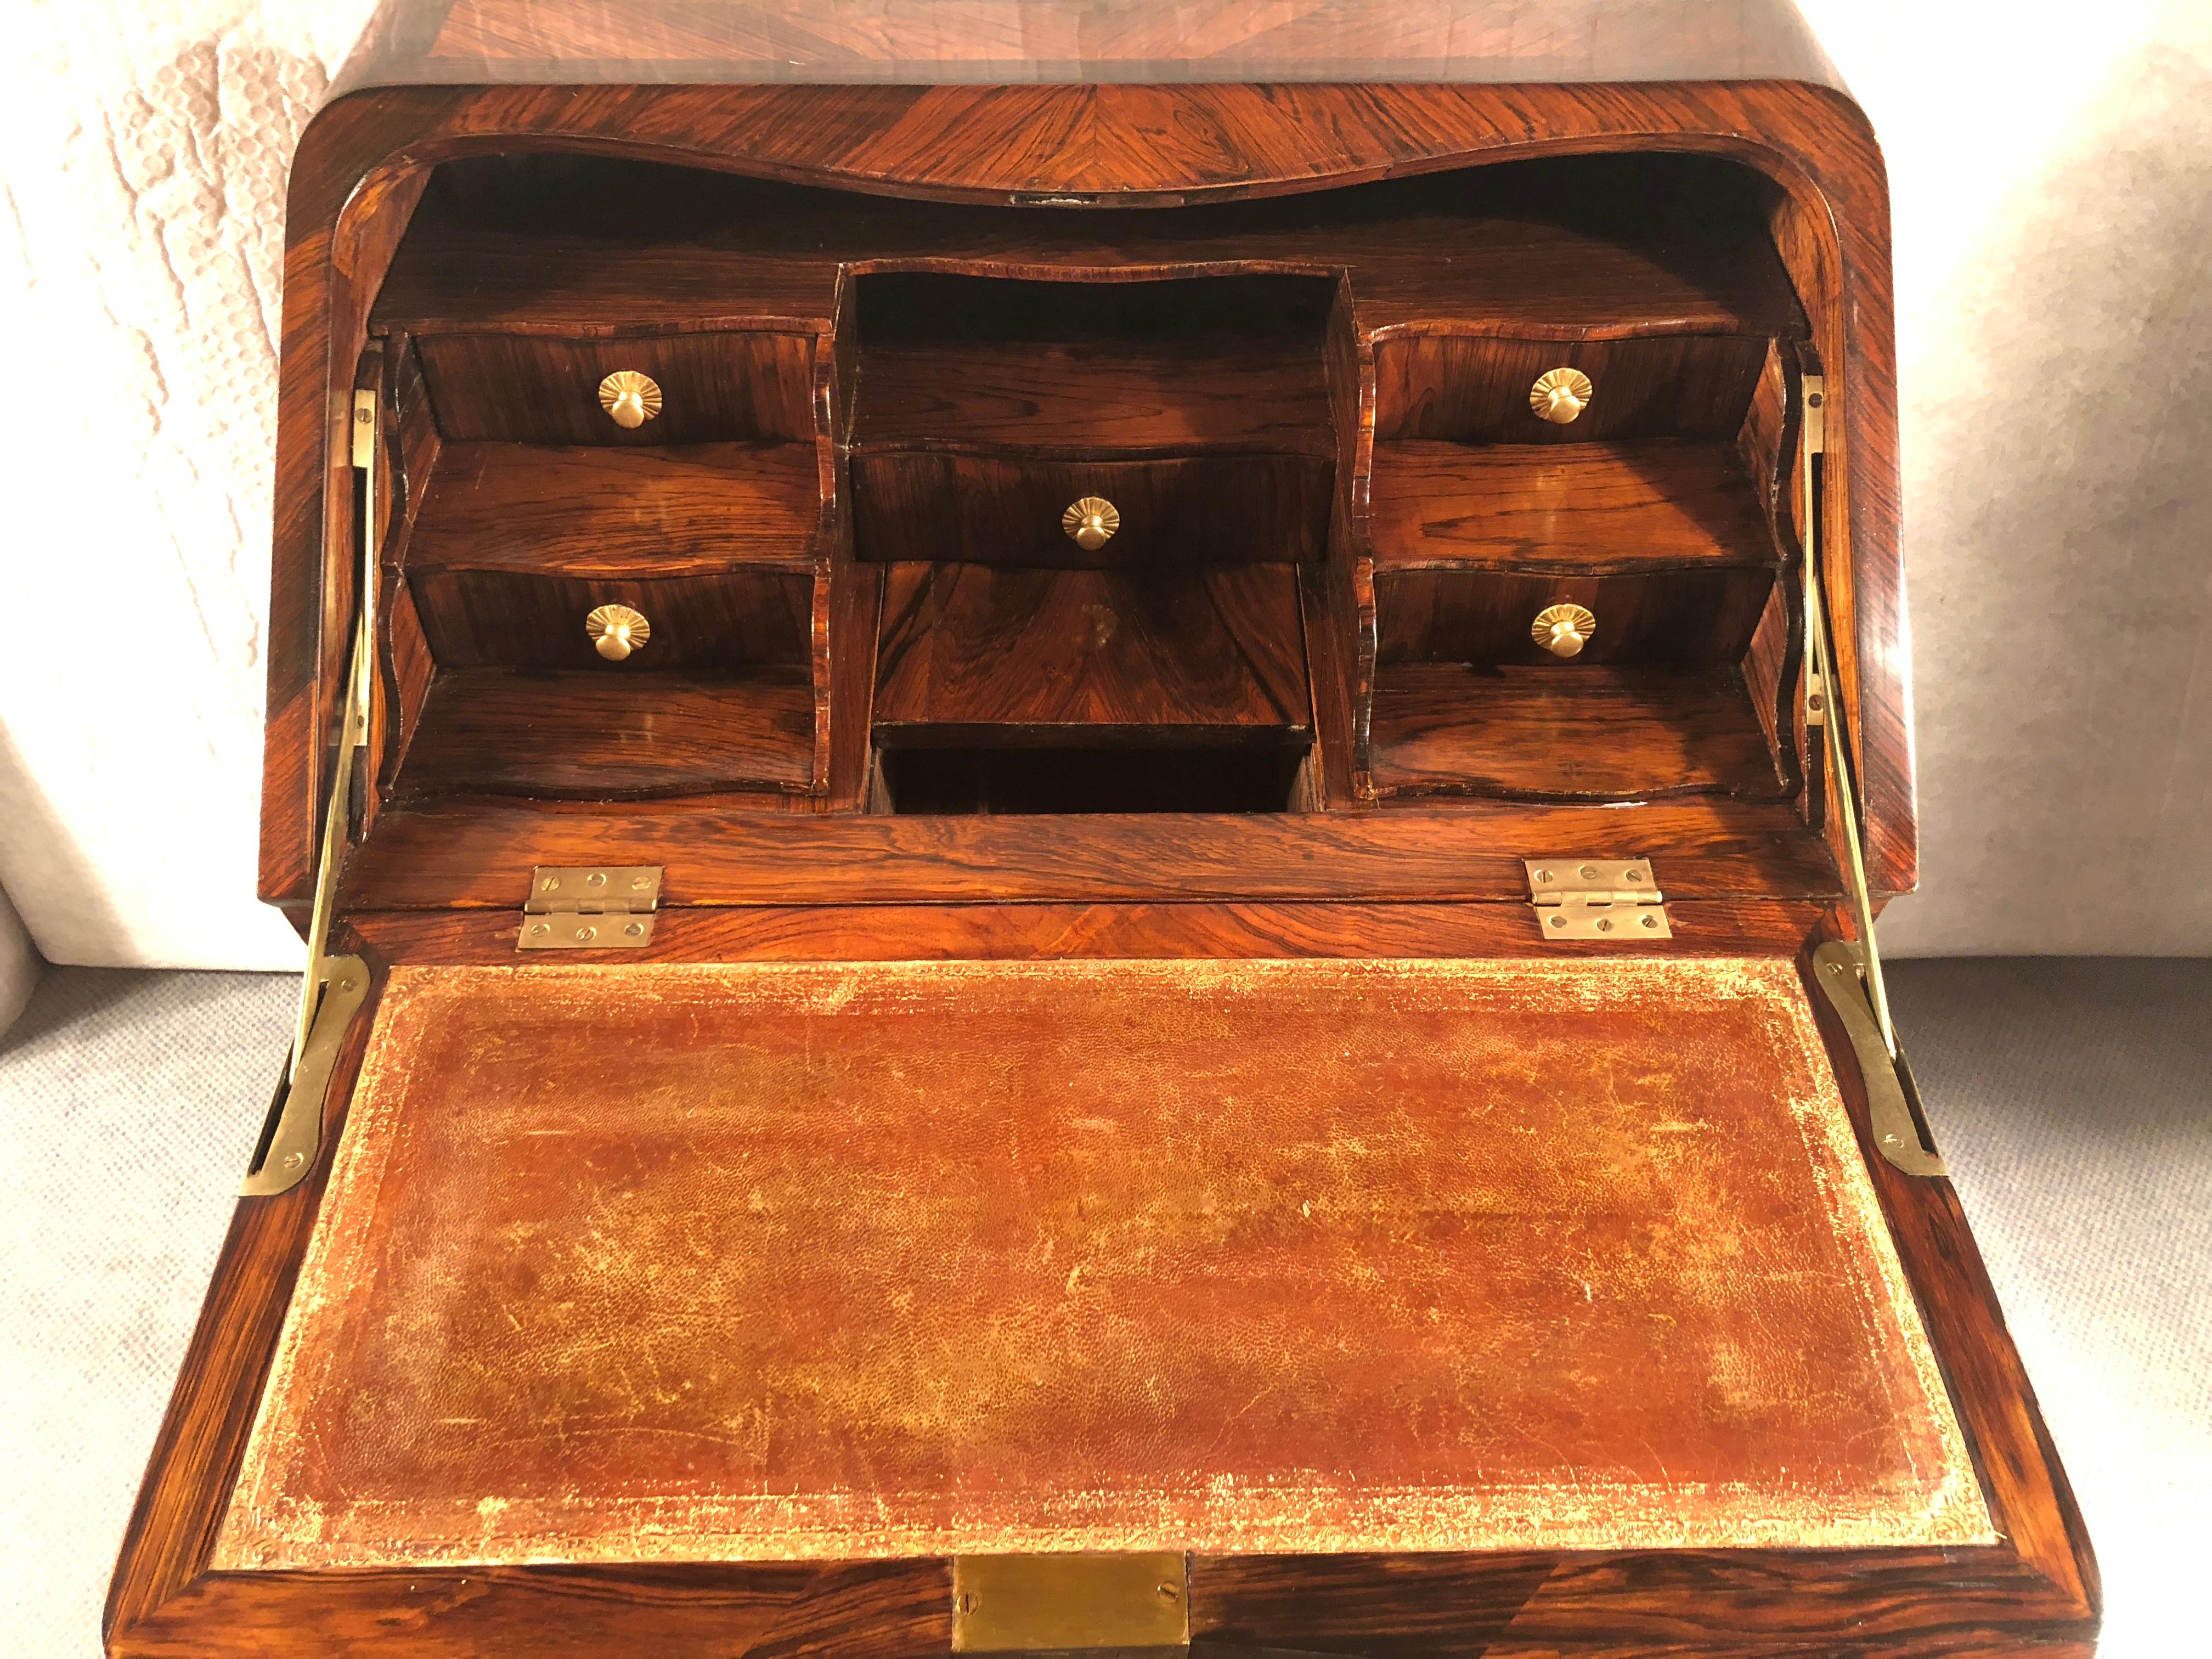 Exquisite secretaire de dame, France 18th century, beautiful kingwood veneer on front, sides, top, back and the inside. The writing surface is covered with leather. With original bronze fittings. The secretaire comes with 4 keys. It is in good